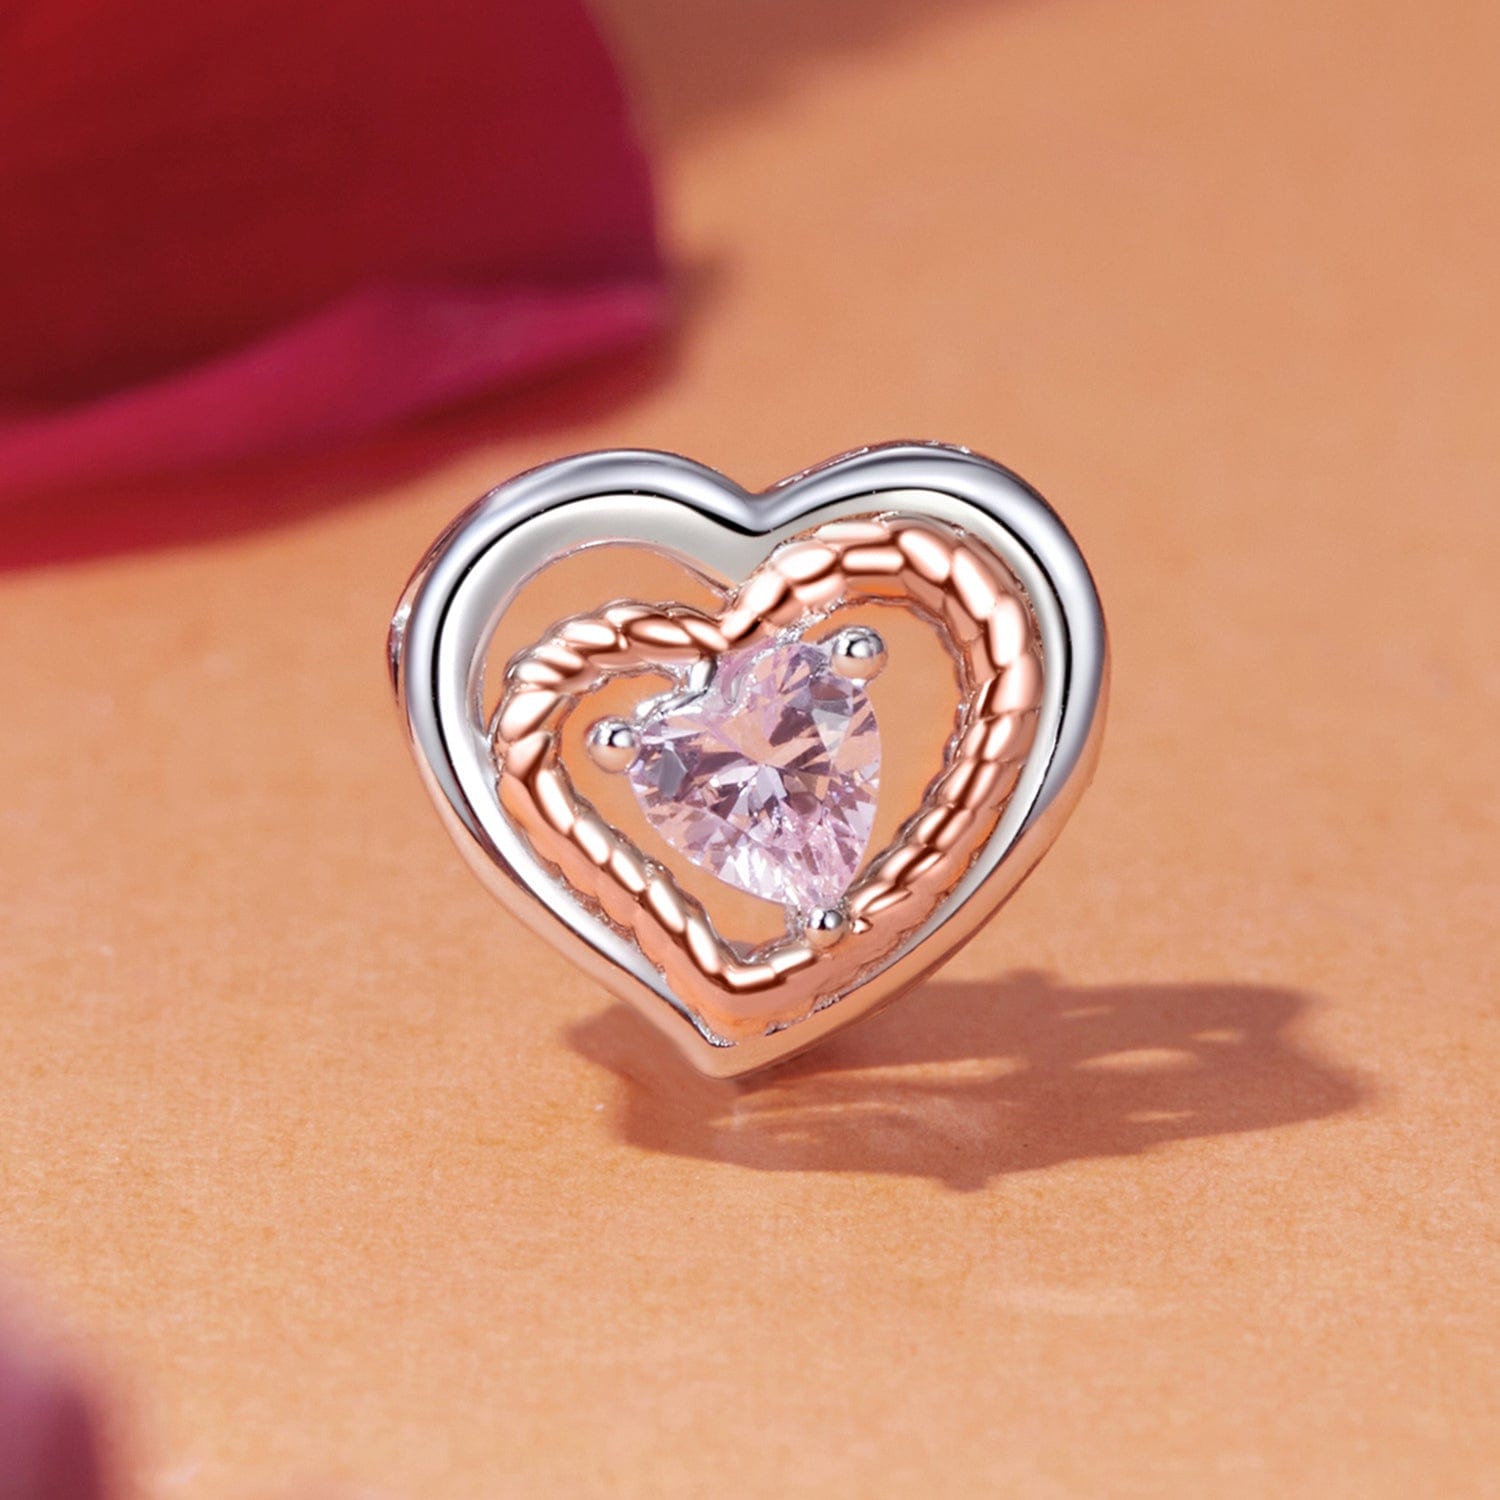 shipped in AUS CHARMS Rose Heart Charm